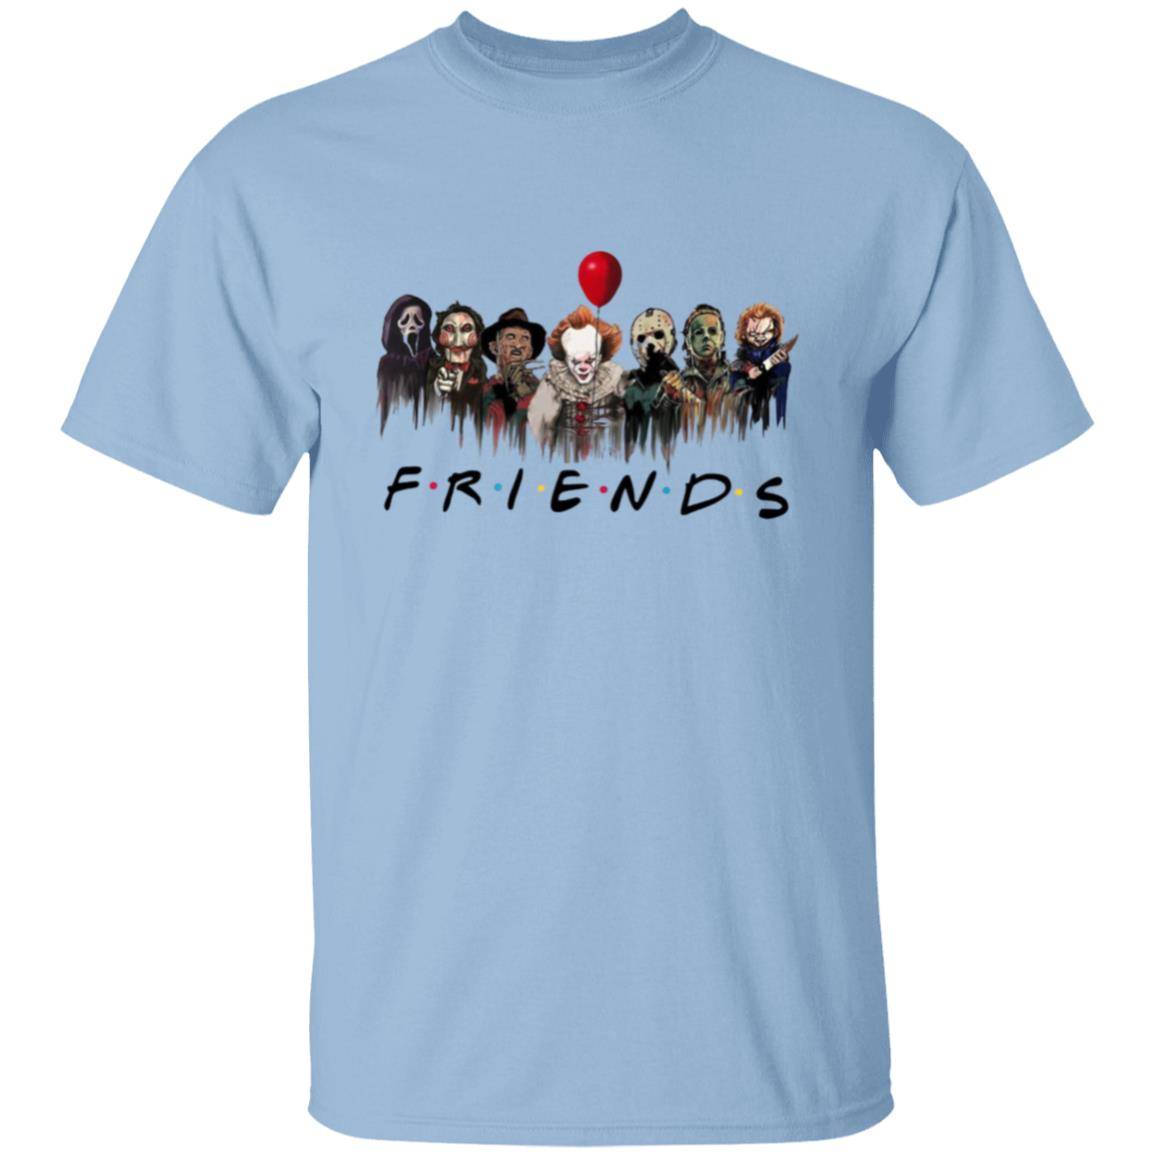 Killer Friends t-shirt in Light blue with the likeness of seven killer friends across the front (Ghostface, Leatherface, Freddy Kruger, Pennywise, Jason Voorhees, Michael Myers and Chucky). The ghoulish logo "FRIENDS" is a parody on the famous sitcom Friends - Any Gift For You